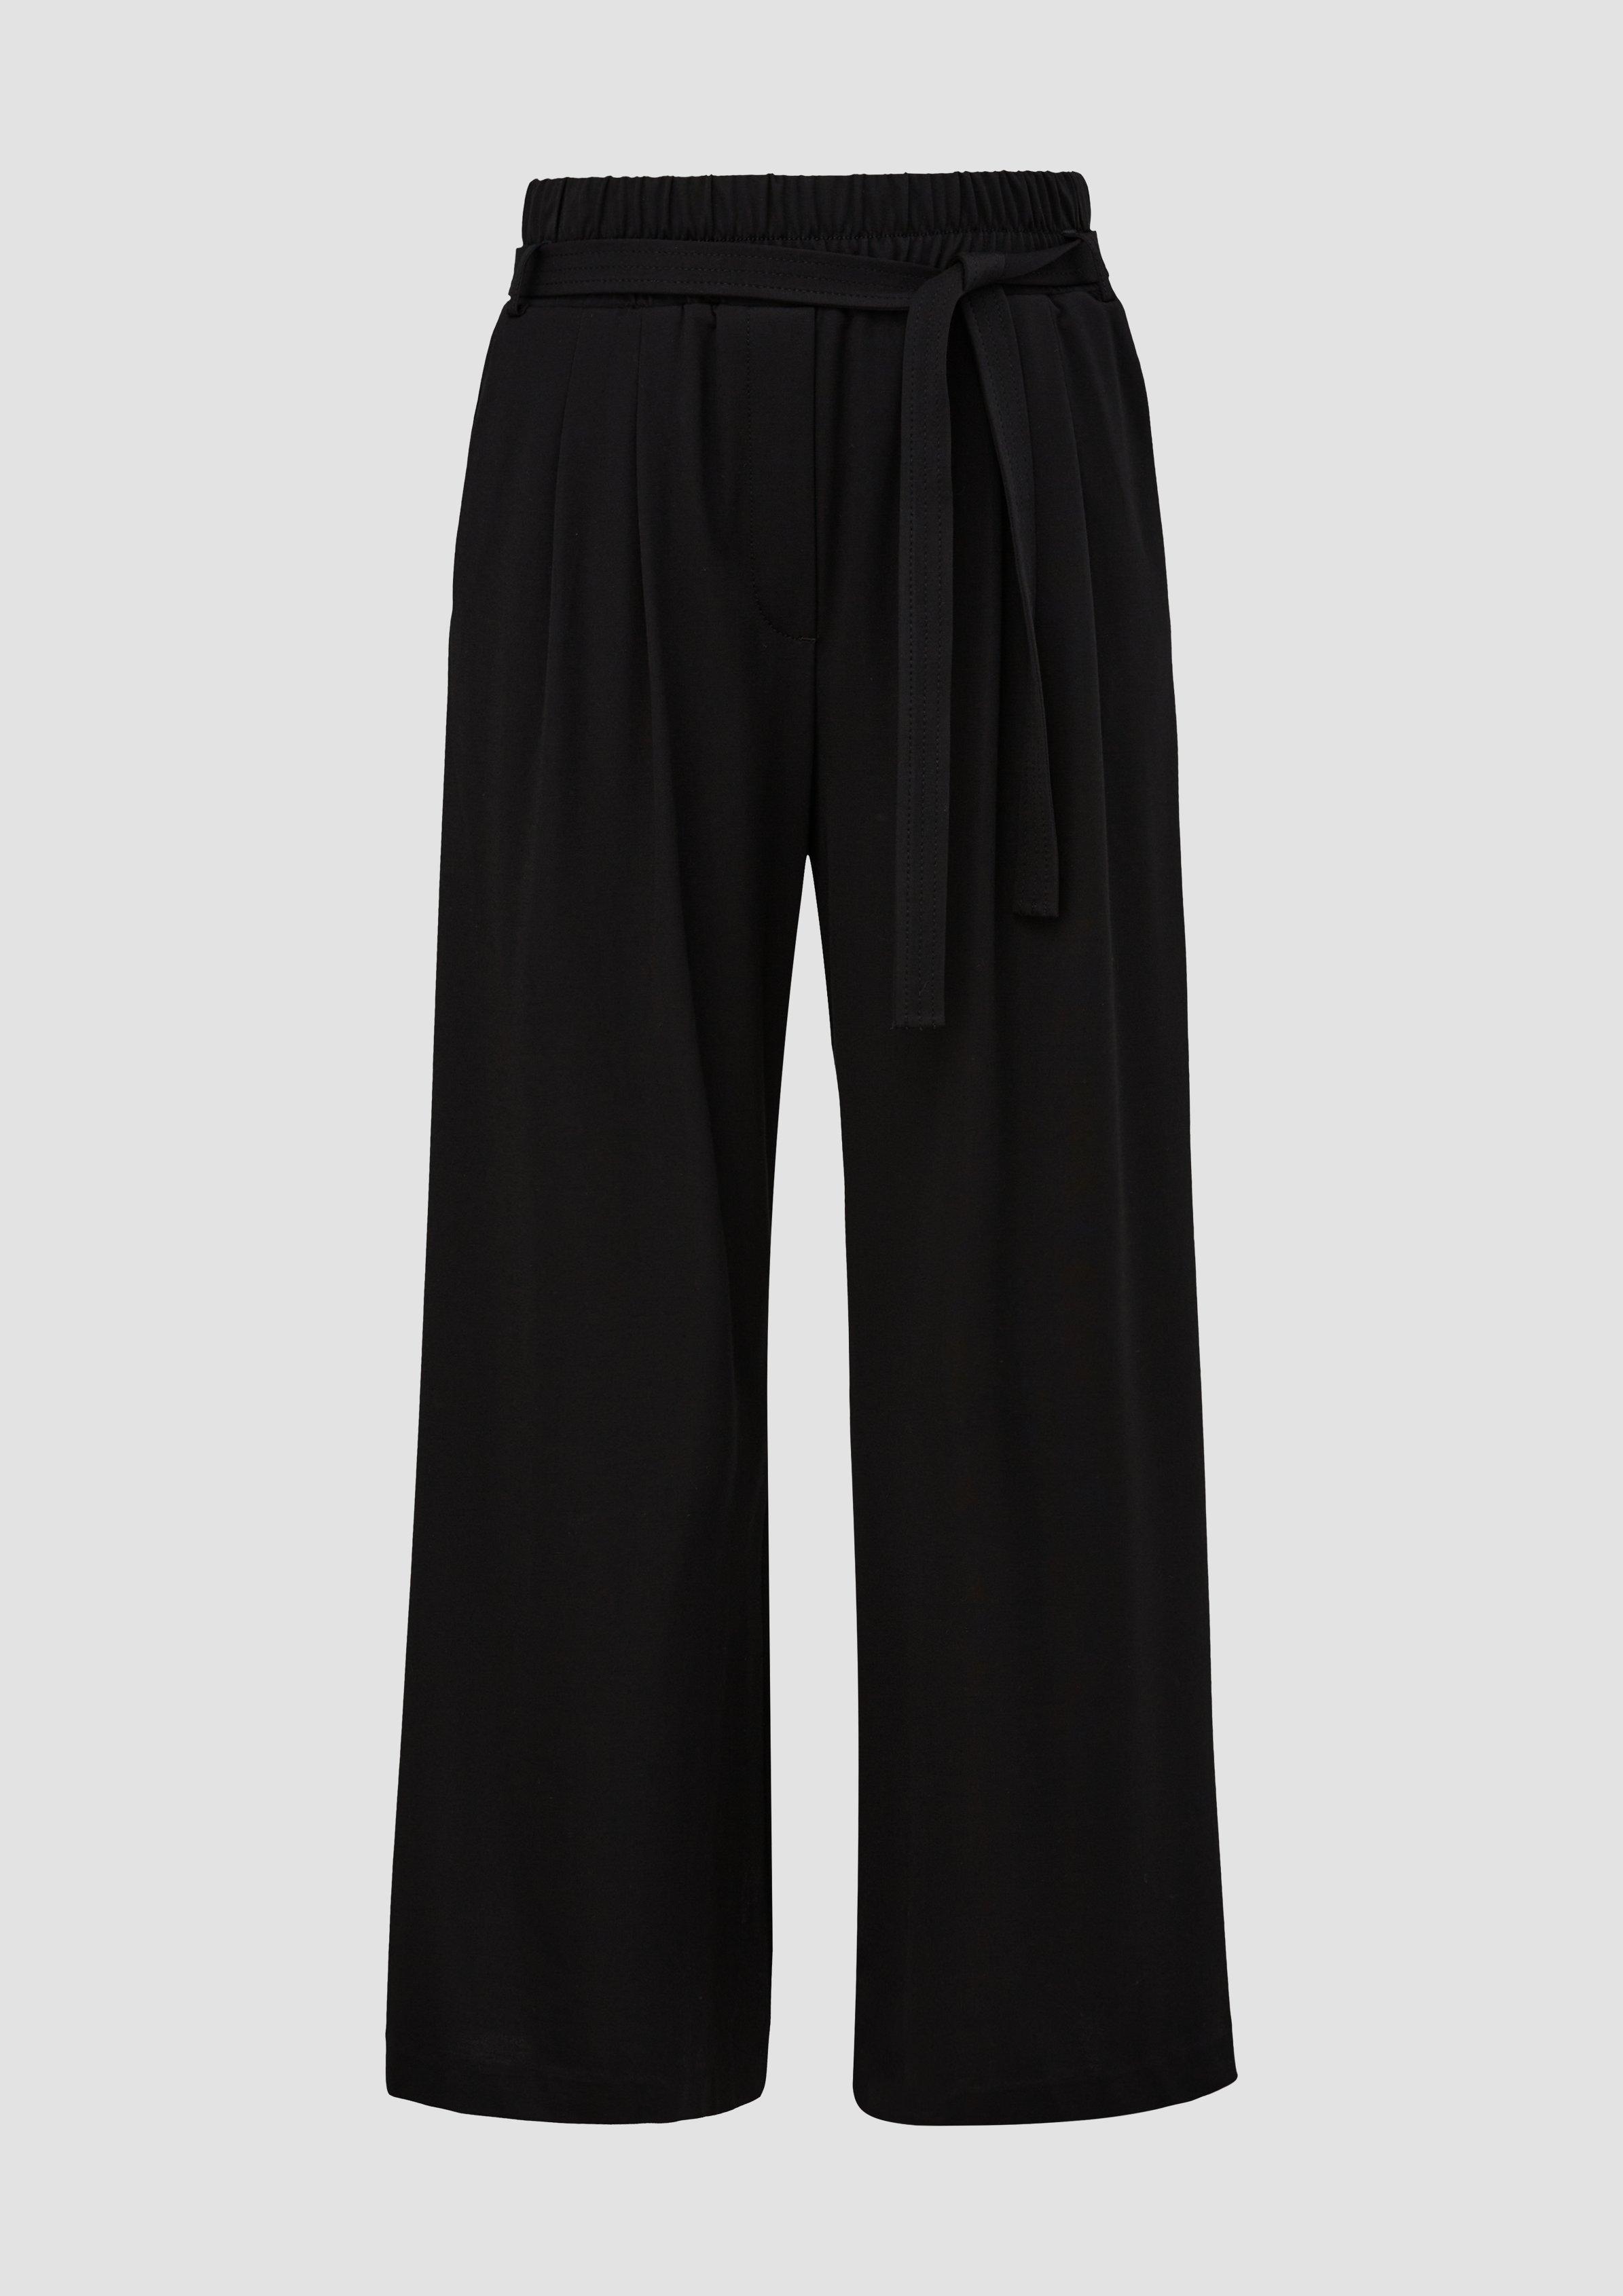 New Trousers and Skirts for Women | Comma